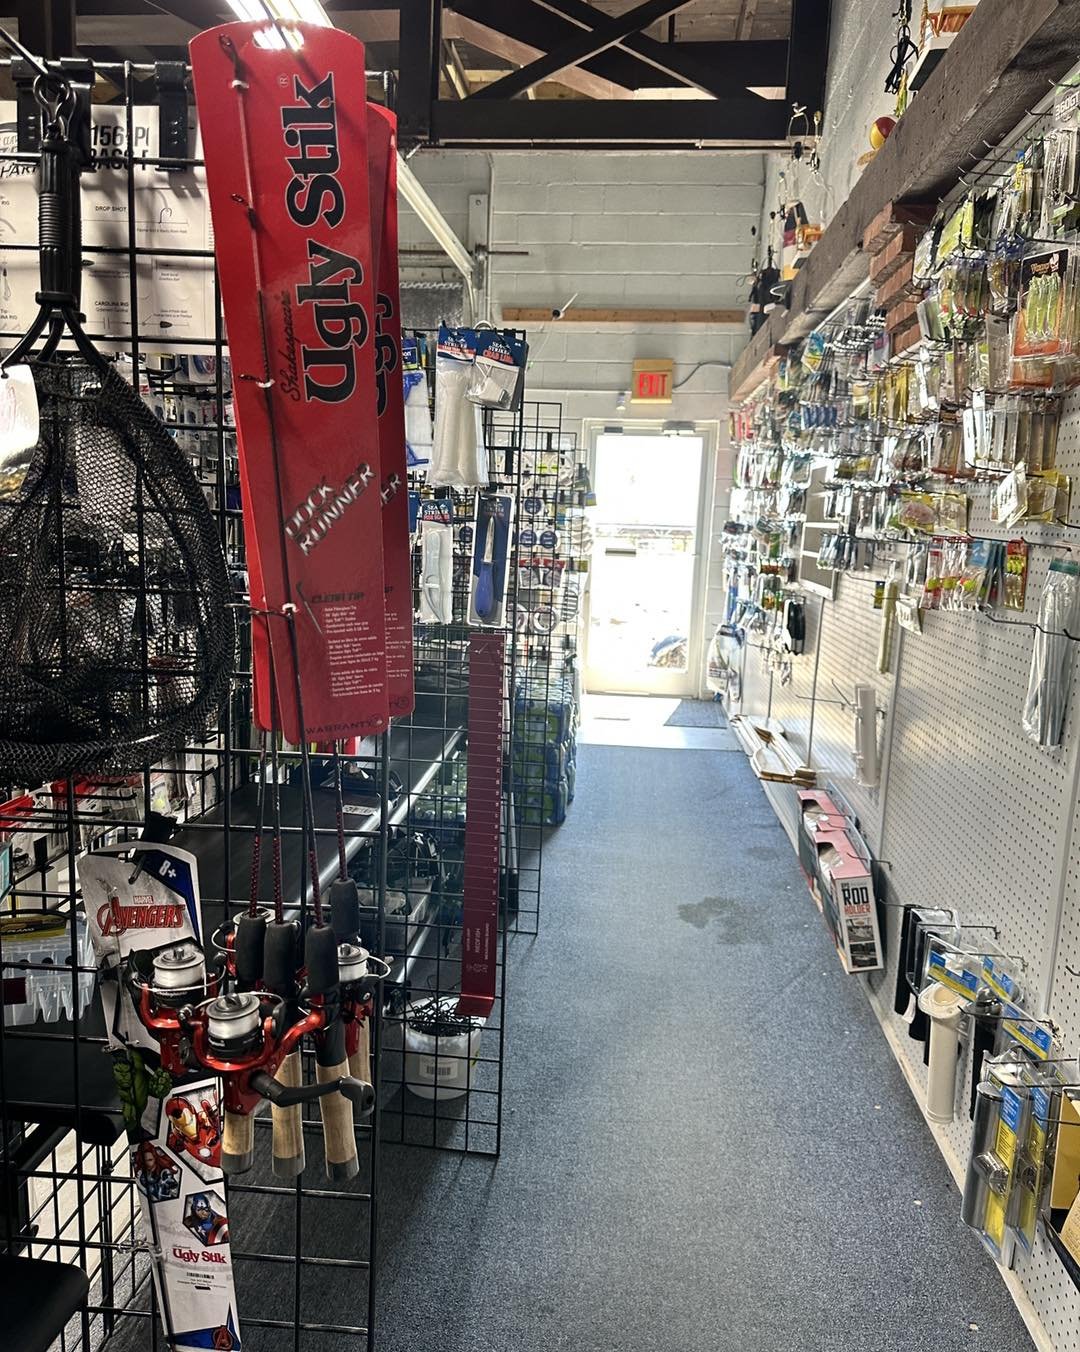 That&rsquo;s a long wall of goodies!!

Come check us out at #tidelinemarine in #jacksonvillenc or online at www.tidelinemarine.com